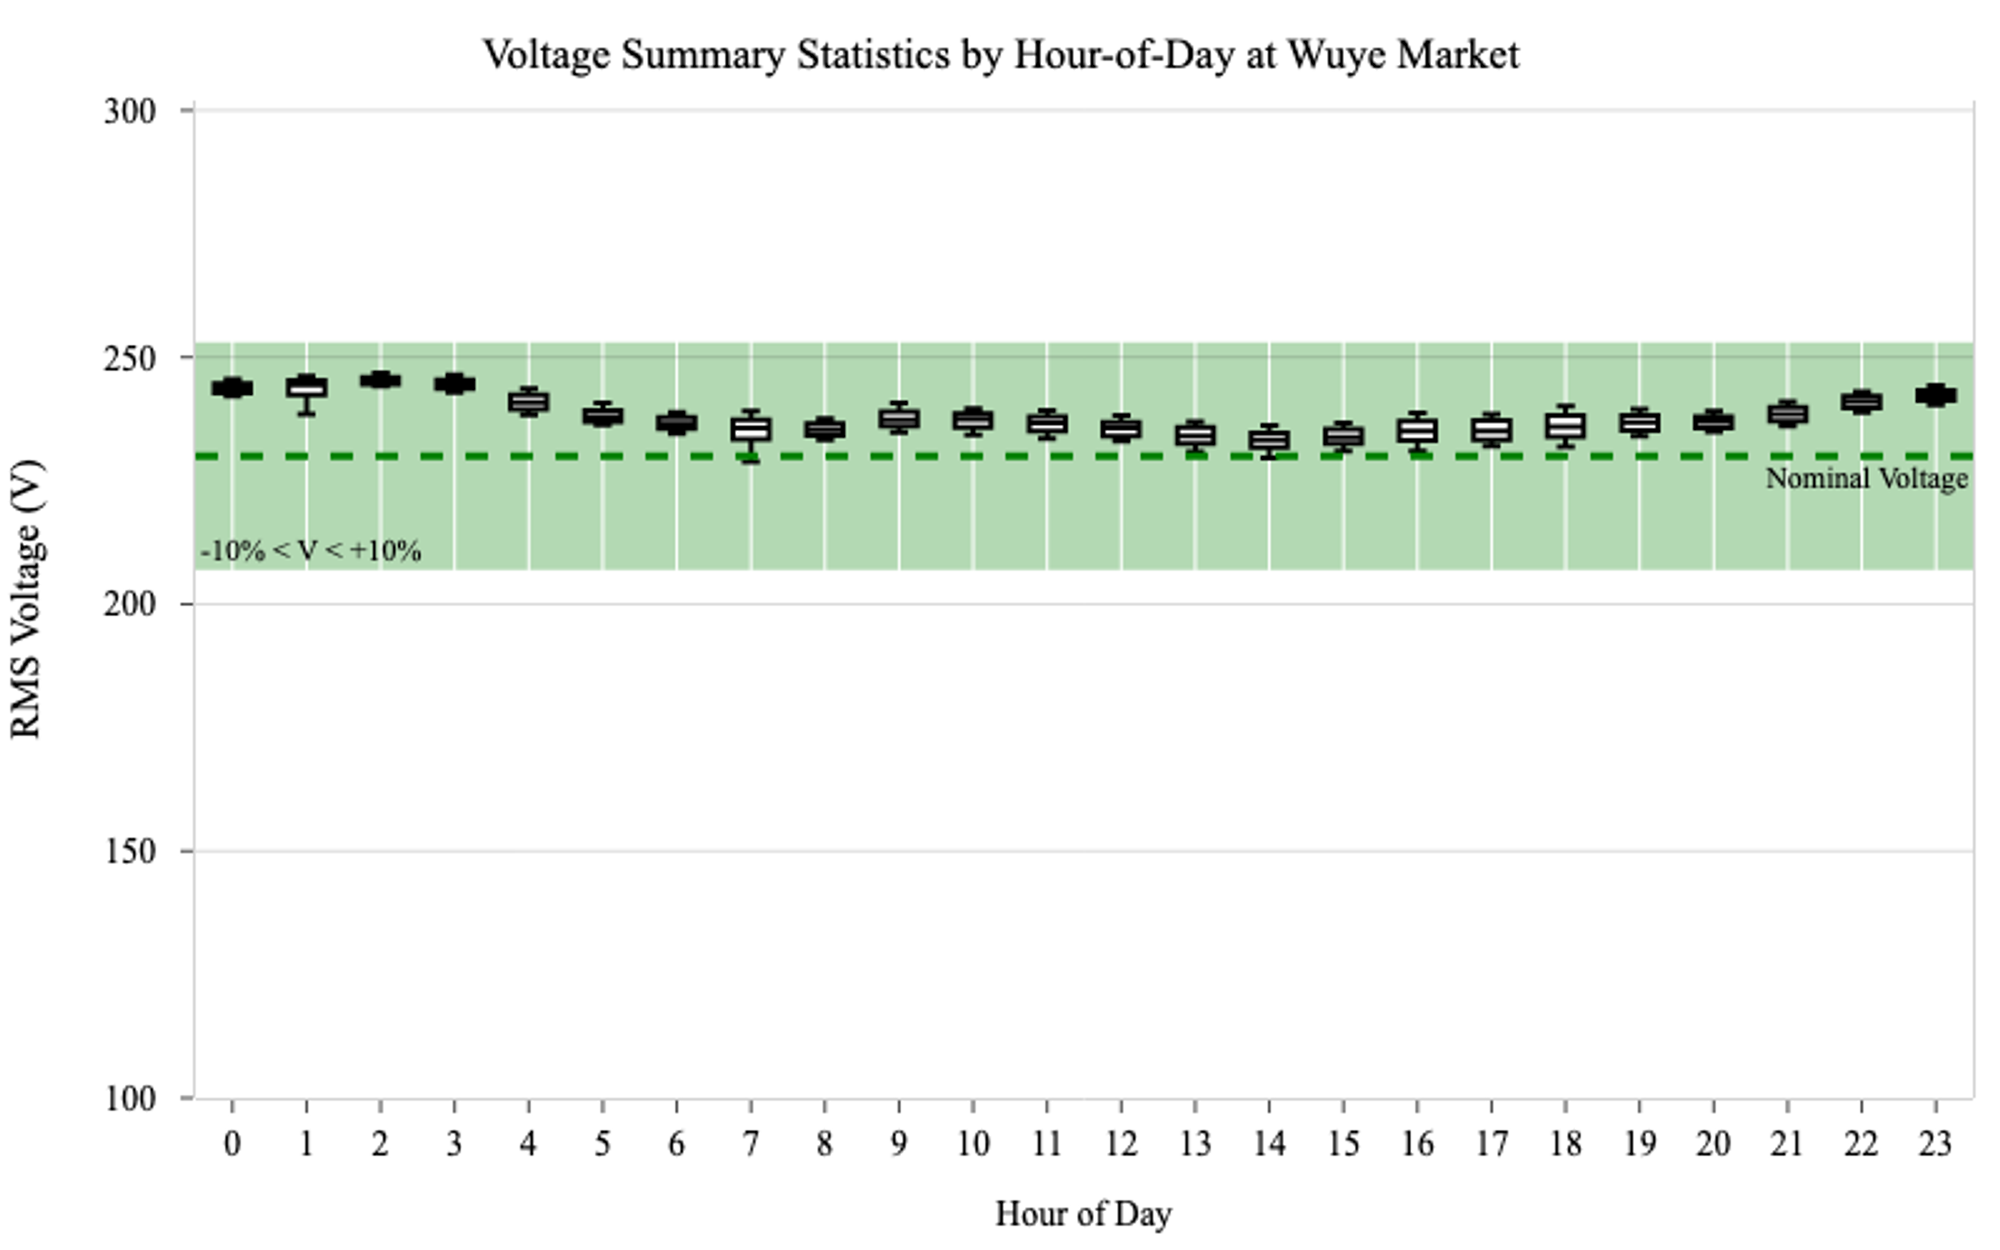 Figure 7: Hourly distribution of voltage at Wuye Market. The green region demarcates the recommended voltage tolerance window of ±10% of the nominal voltage of 230V. During market hours (roughly 8:00 AM - 6:00 PM), voltage levels are within ±10% of 230V. The voltage is higher during the night but remains within this IEEE-recommended tolerance window. This, therefore, suggests that the voltage at Wuye Market is of good quality.